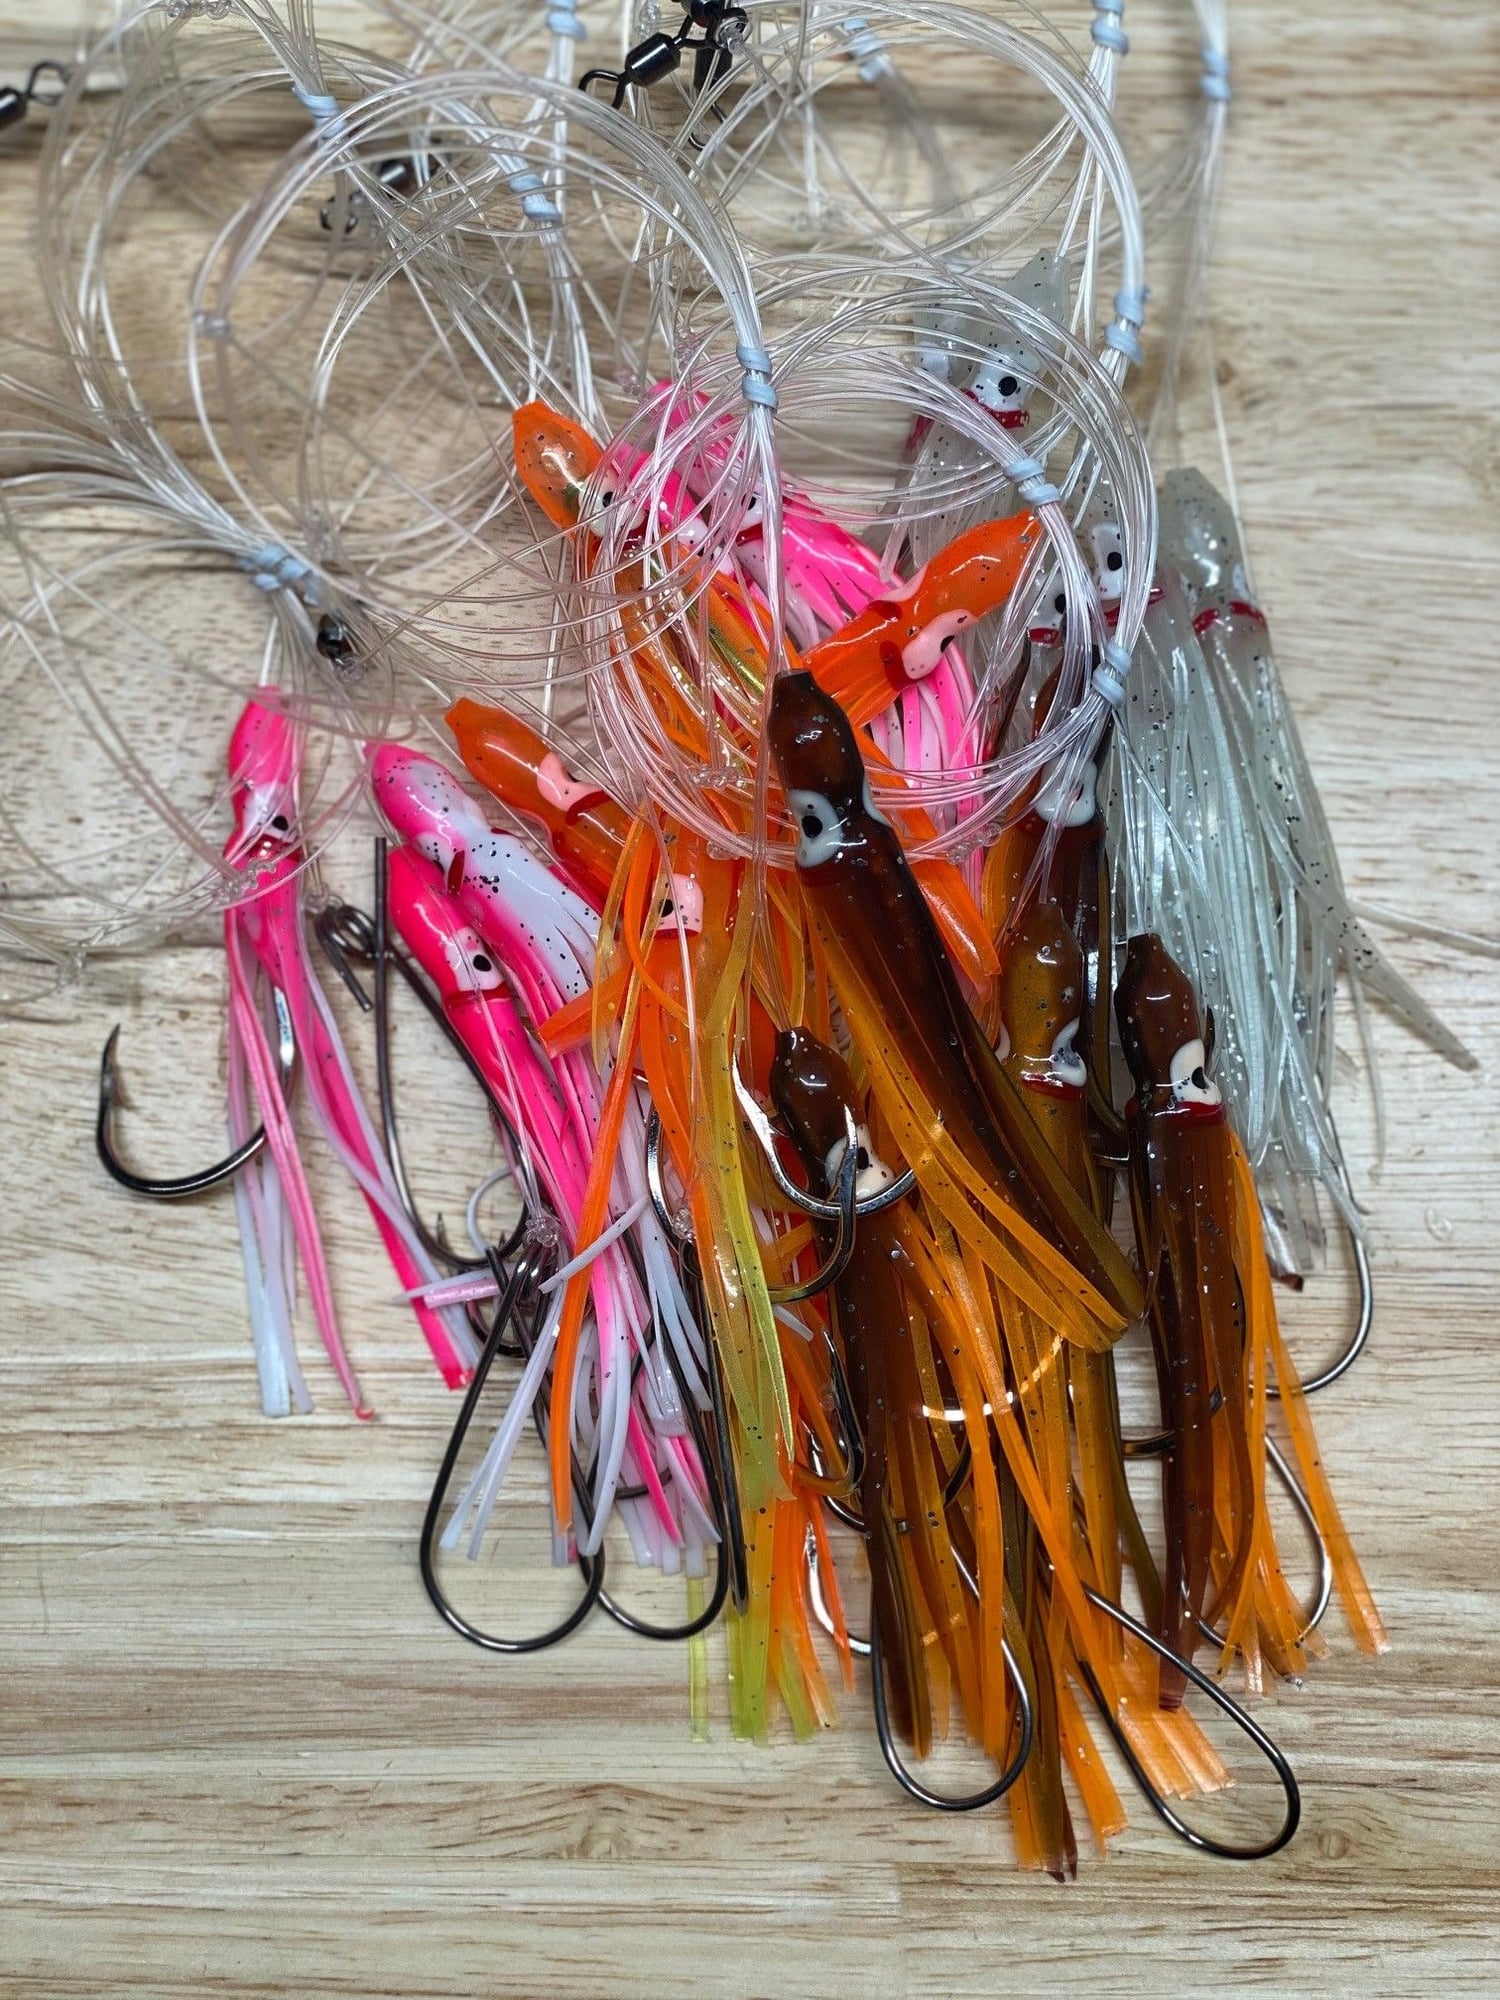 Rigs and Jigs for All Seasons - The Hull Truth - Boating and Fishing Forum